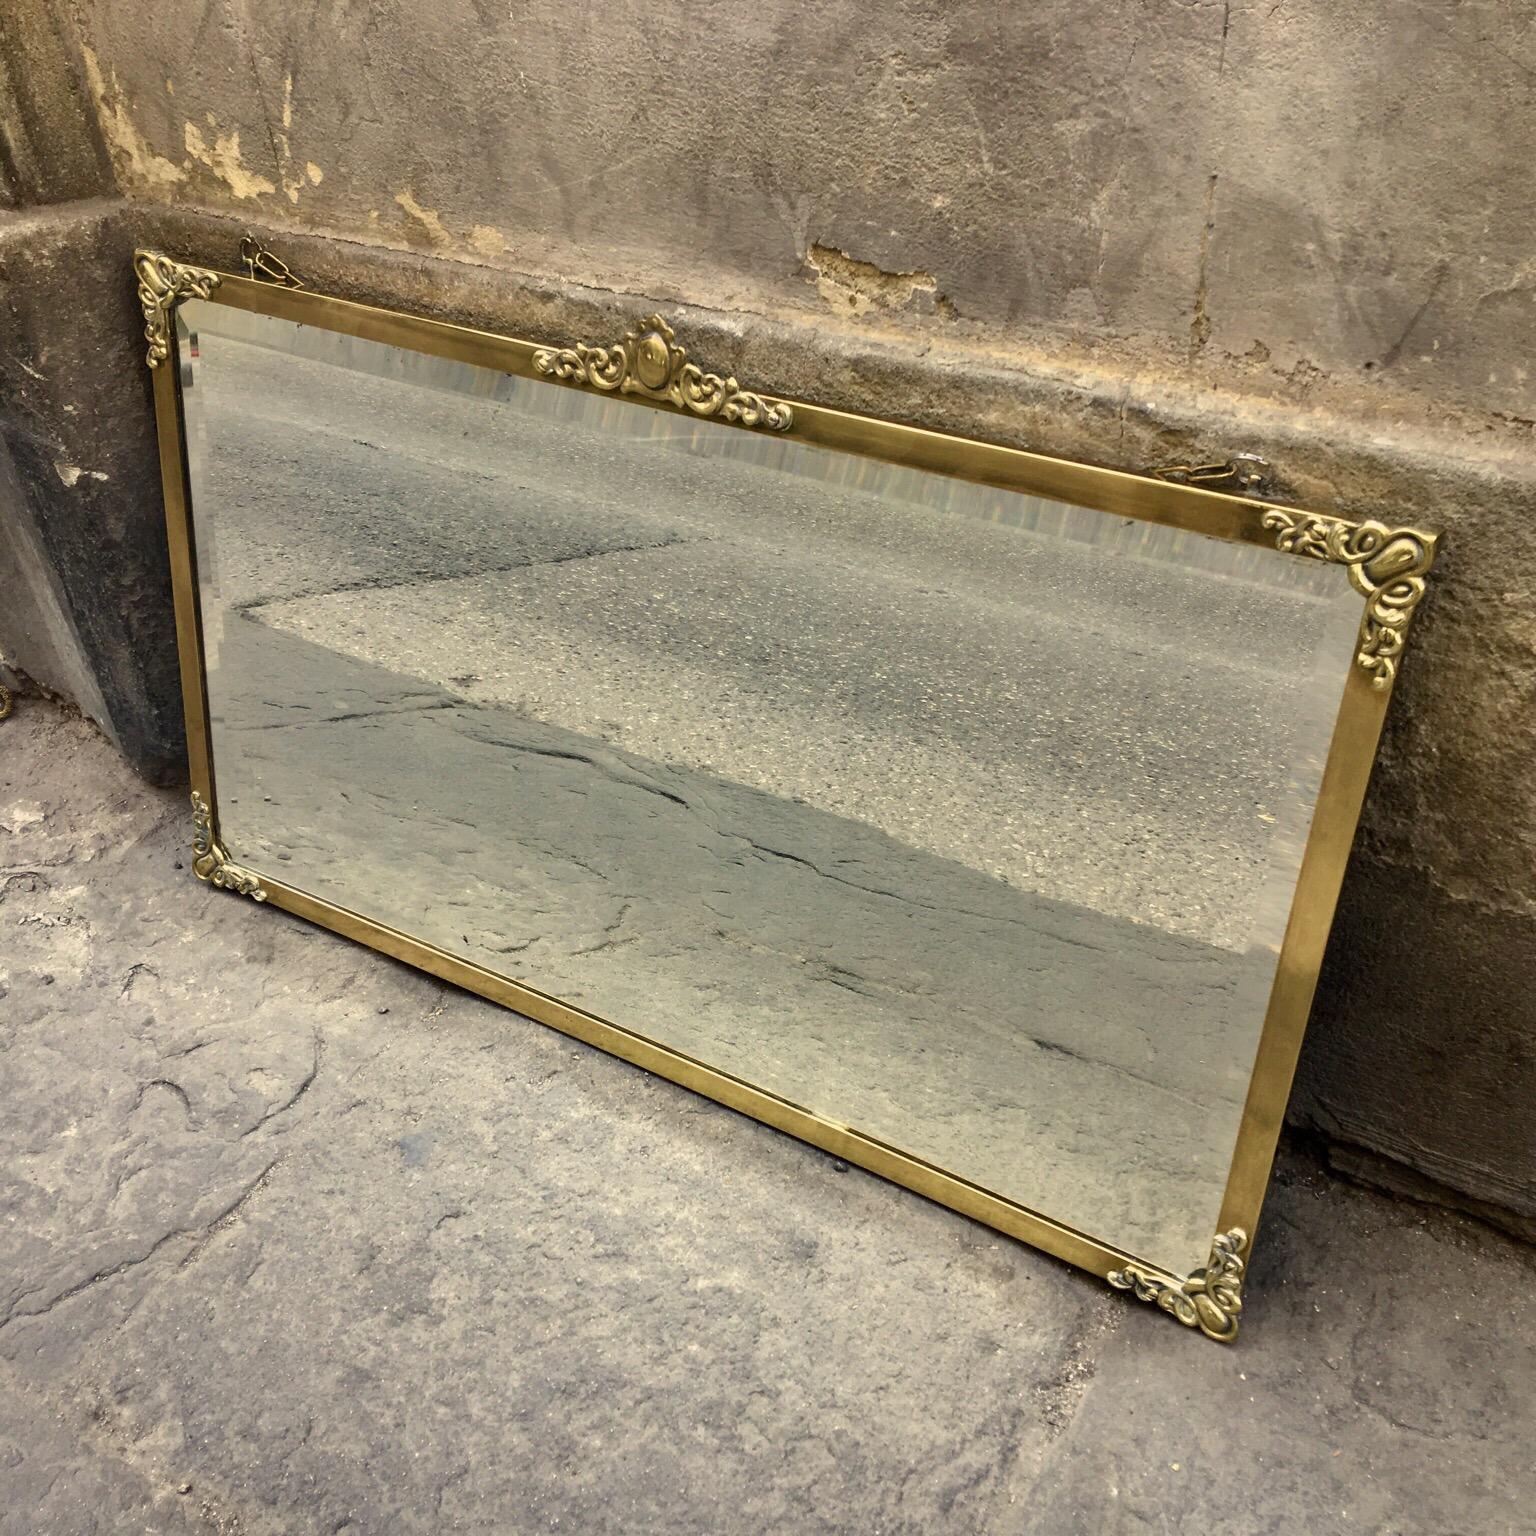 Rectangular Art Nouveau Mirror with Brass Frame and Friezes, Early 1900 For Sale 2